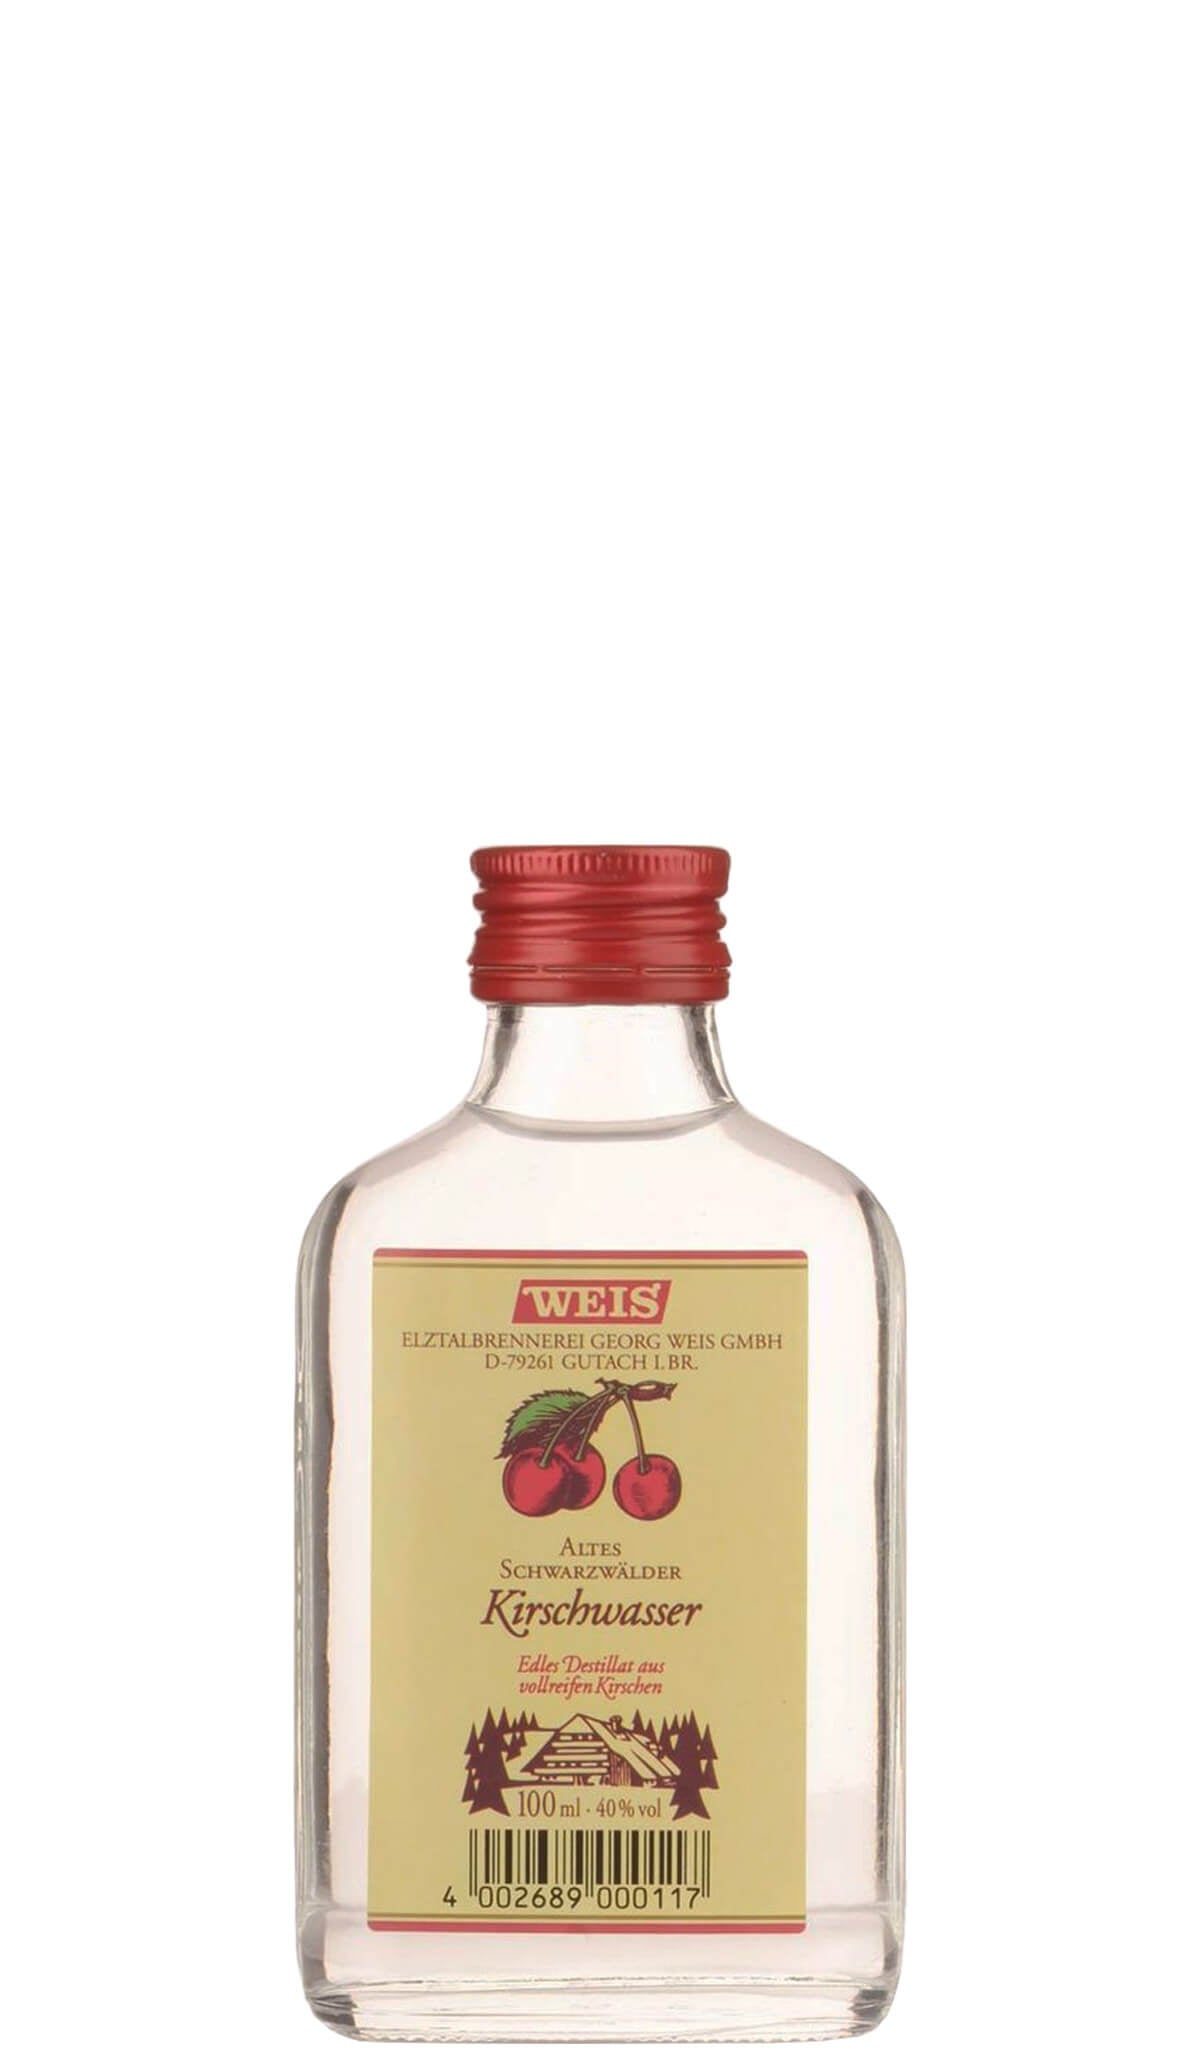 Find out more or buy Weis (Kirsch) Cherry Brandy 100ml online at Wine Sellers Direct - Australia’s independent liquor specialists.